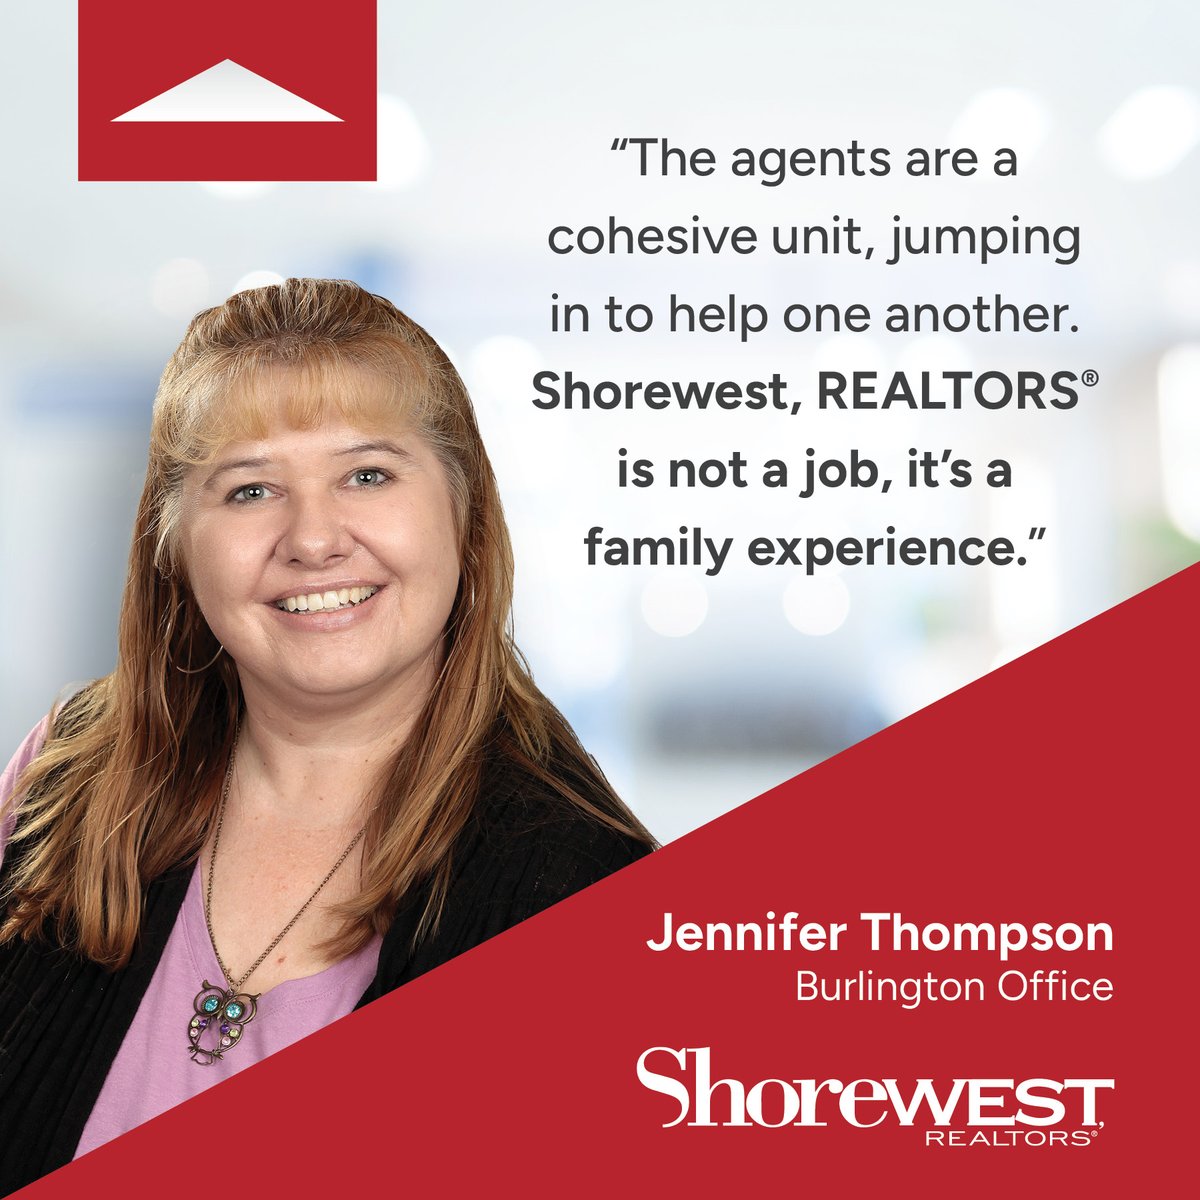 Looking for a team who will have your back? Shorewest, REALTORS® is here for you! Visit joinshorewest.com to learn all about what a career with us could look like for you. 

#ShorewestRealtors 
#JoinShorewest 
#WisconsinRealEstate